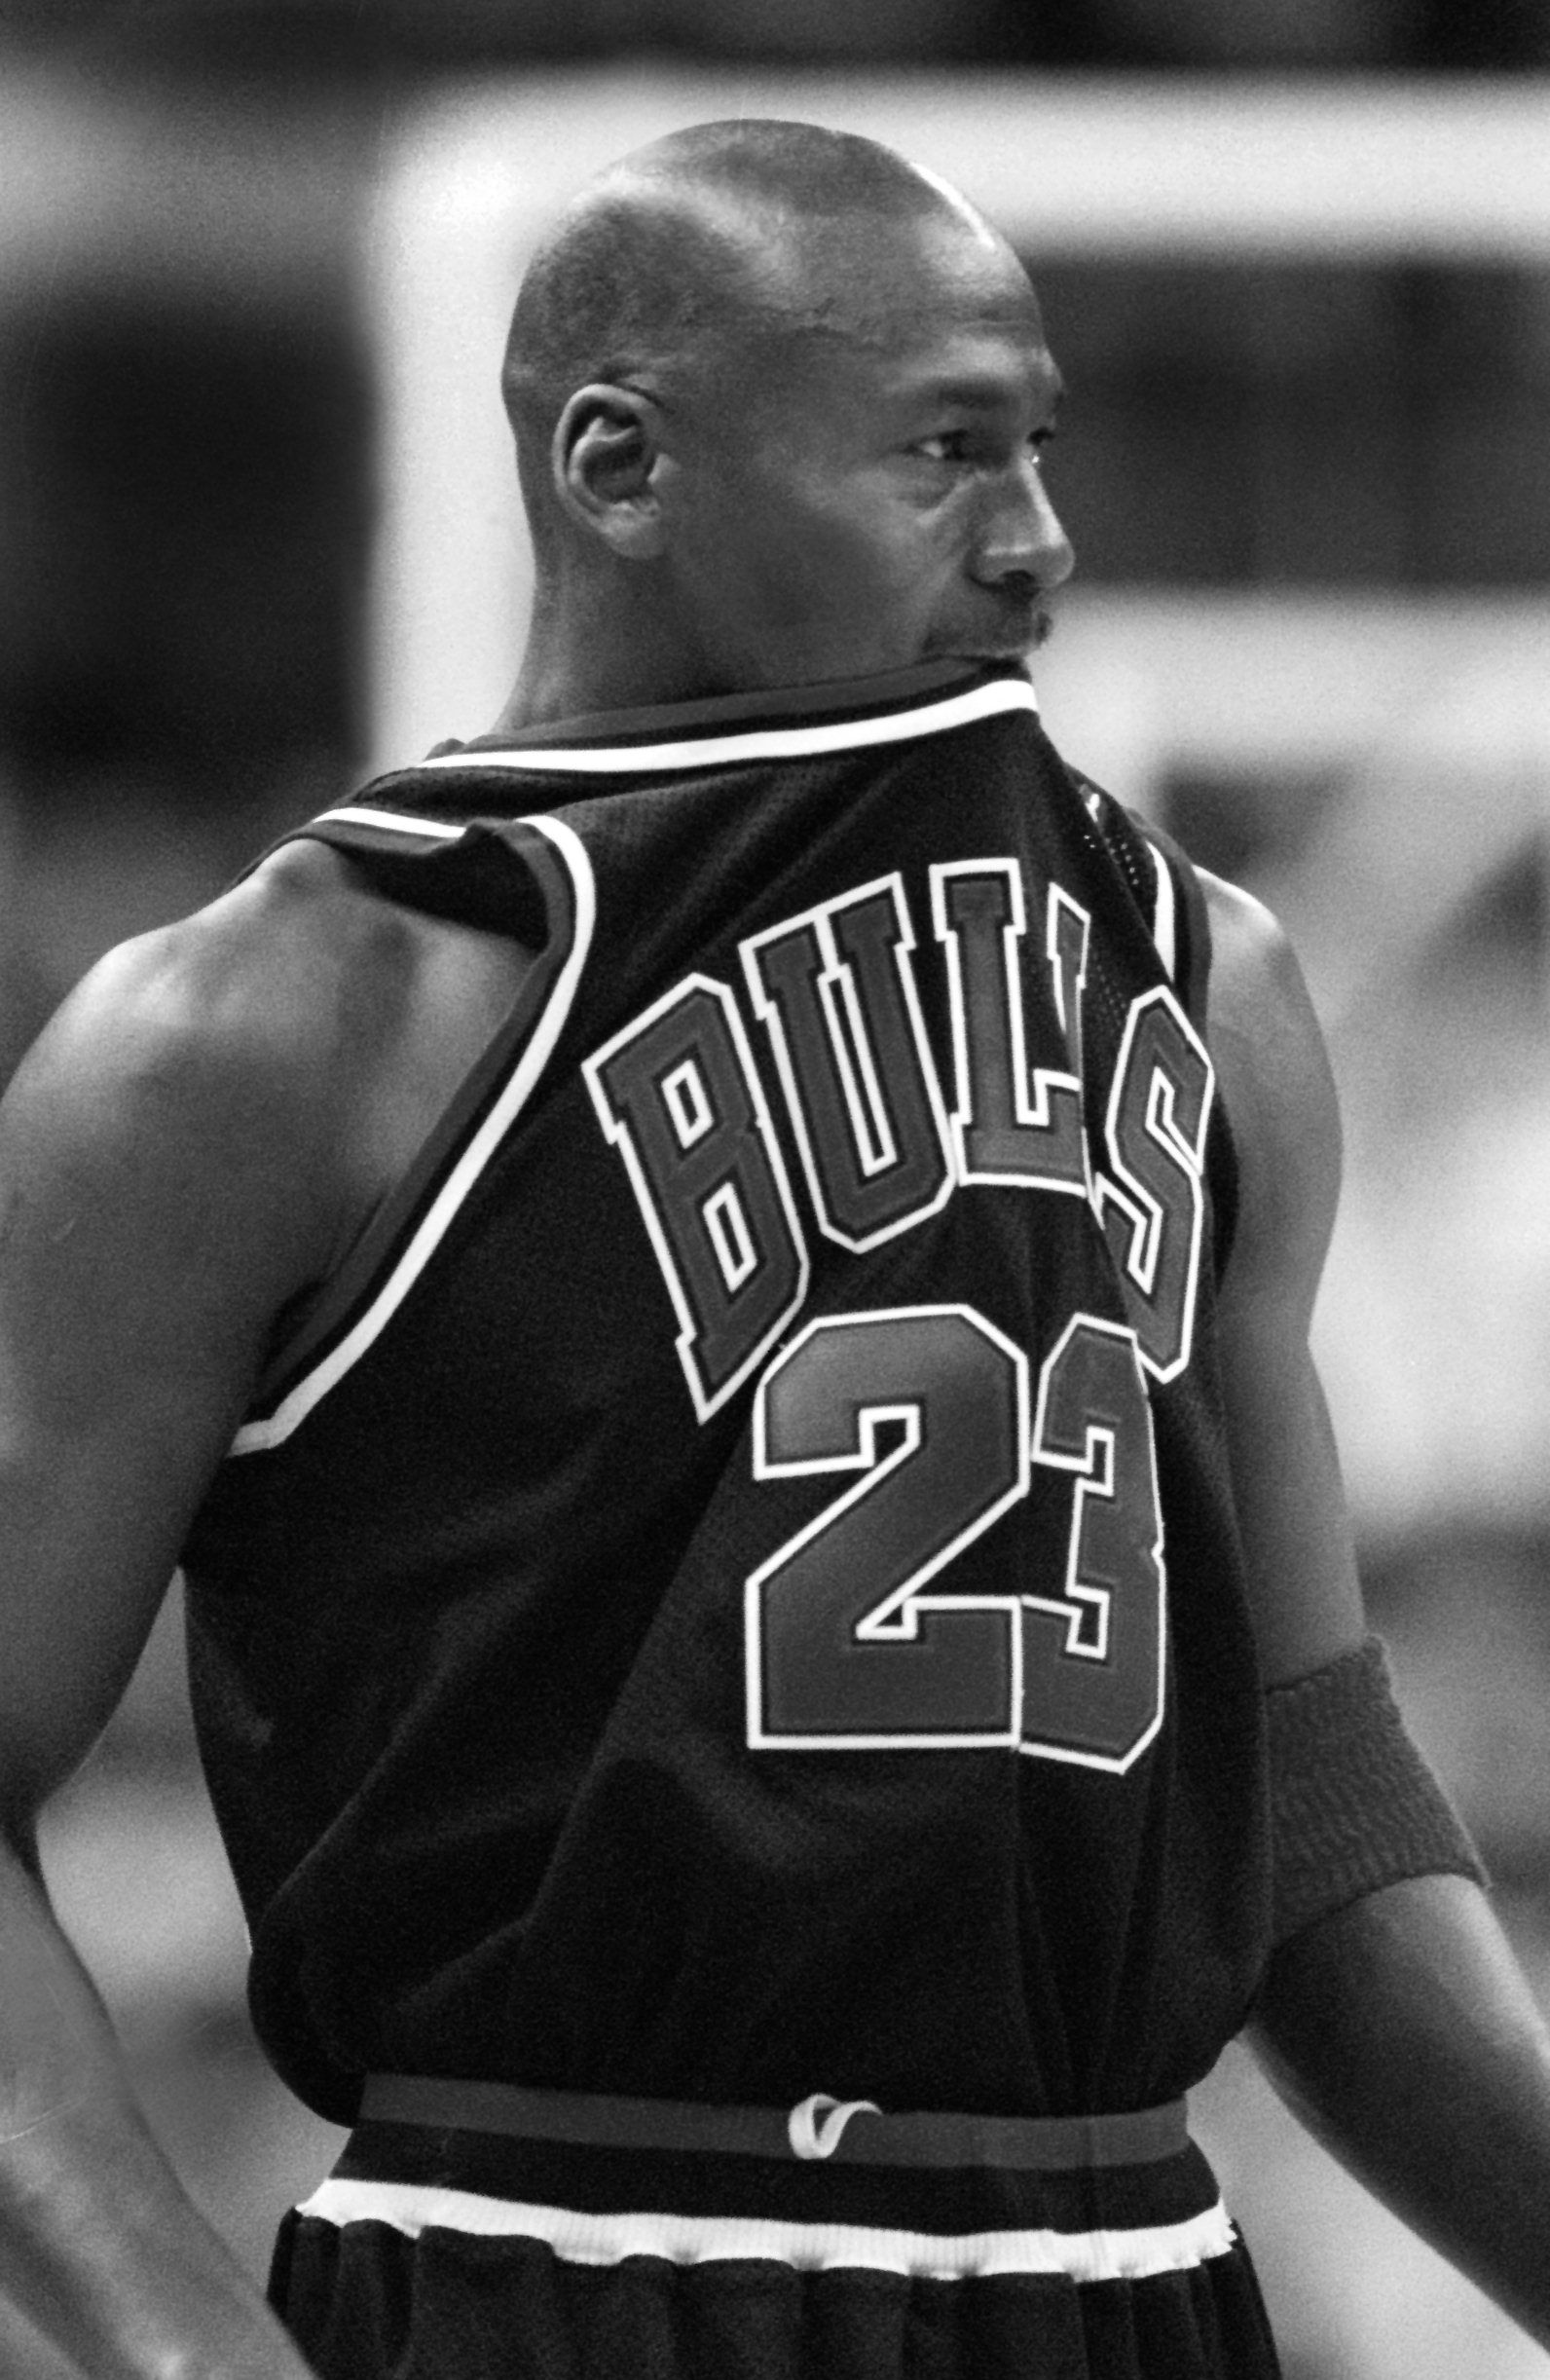 Michael Jordan bites on his jersey during a break in the action in 1st half at MCI Center on February 28, 1998 | Source: Getty Images